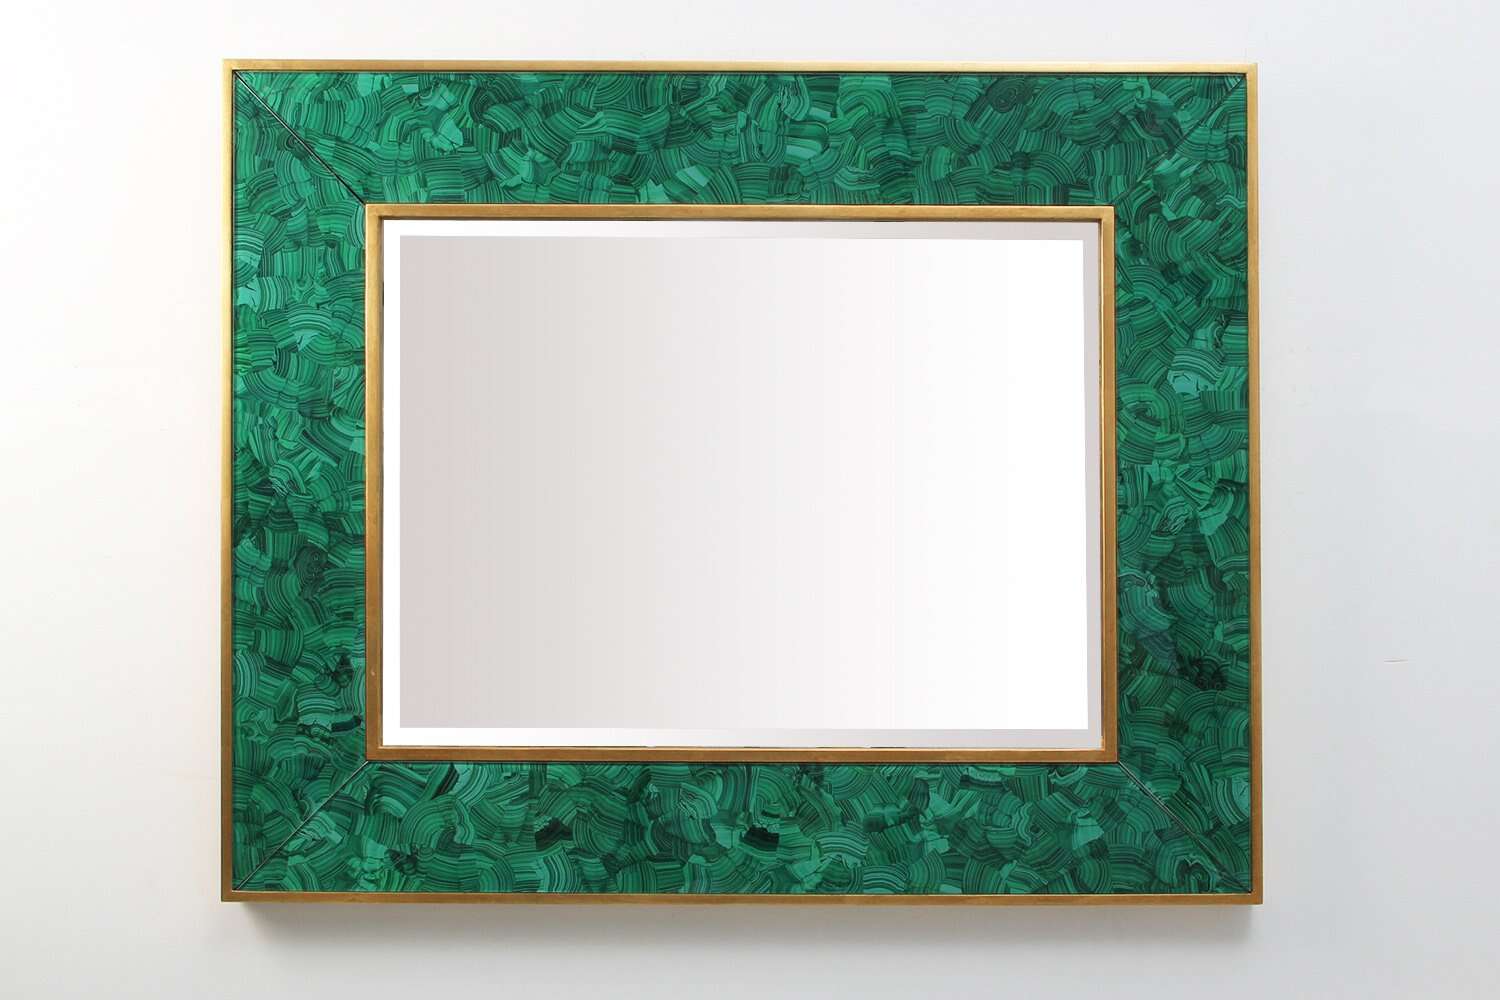 Unique hall mirror in malachite and gold leaf  Luxury Wall mirror